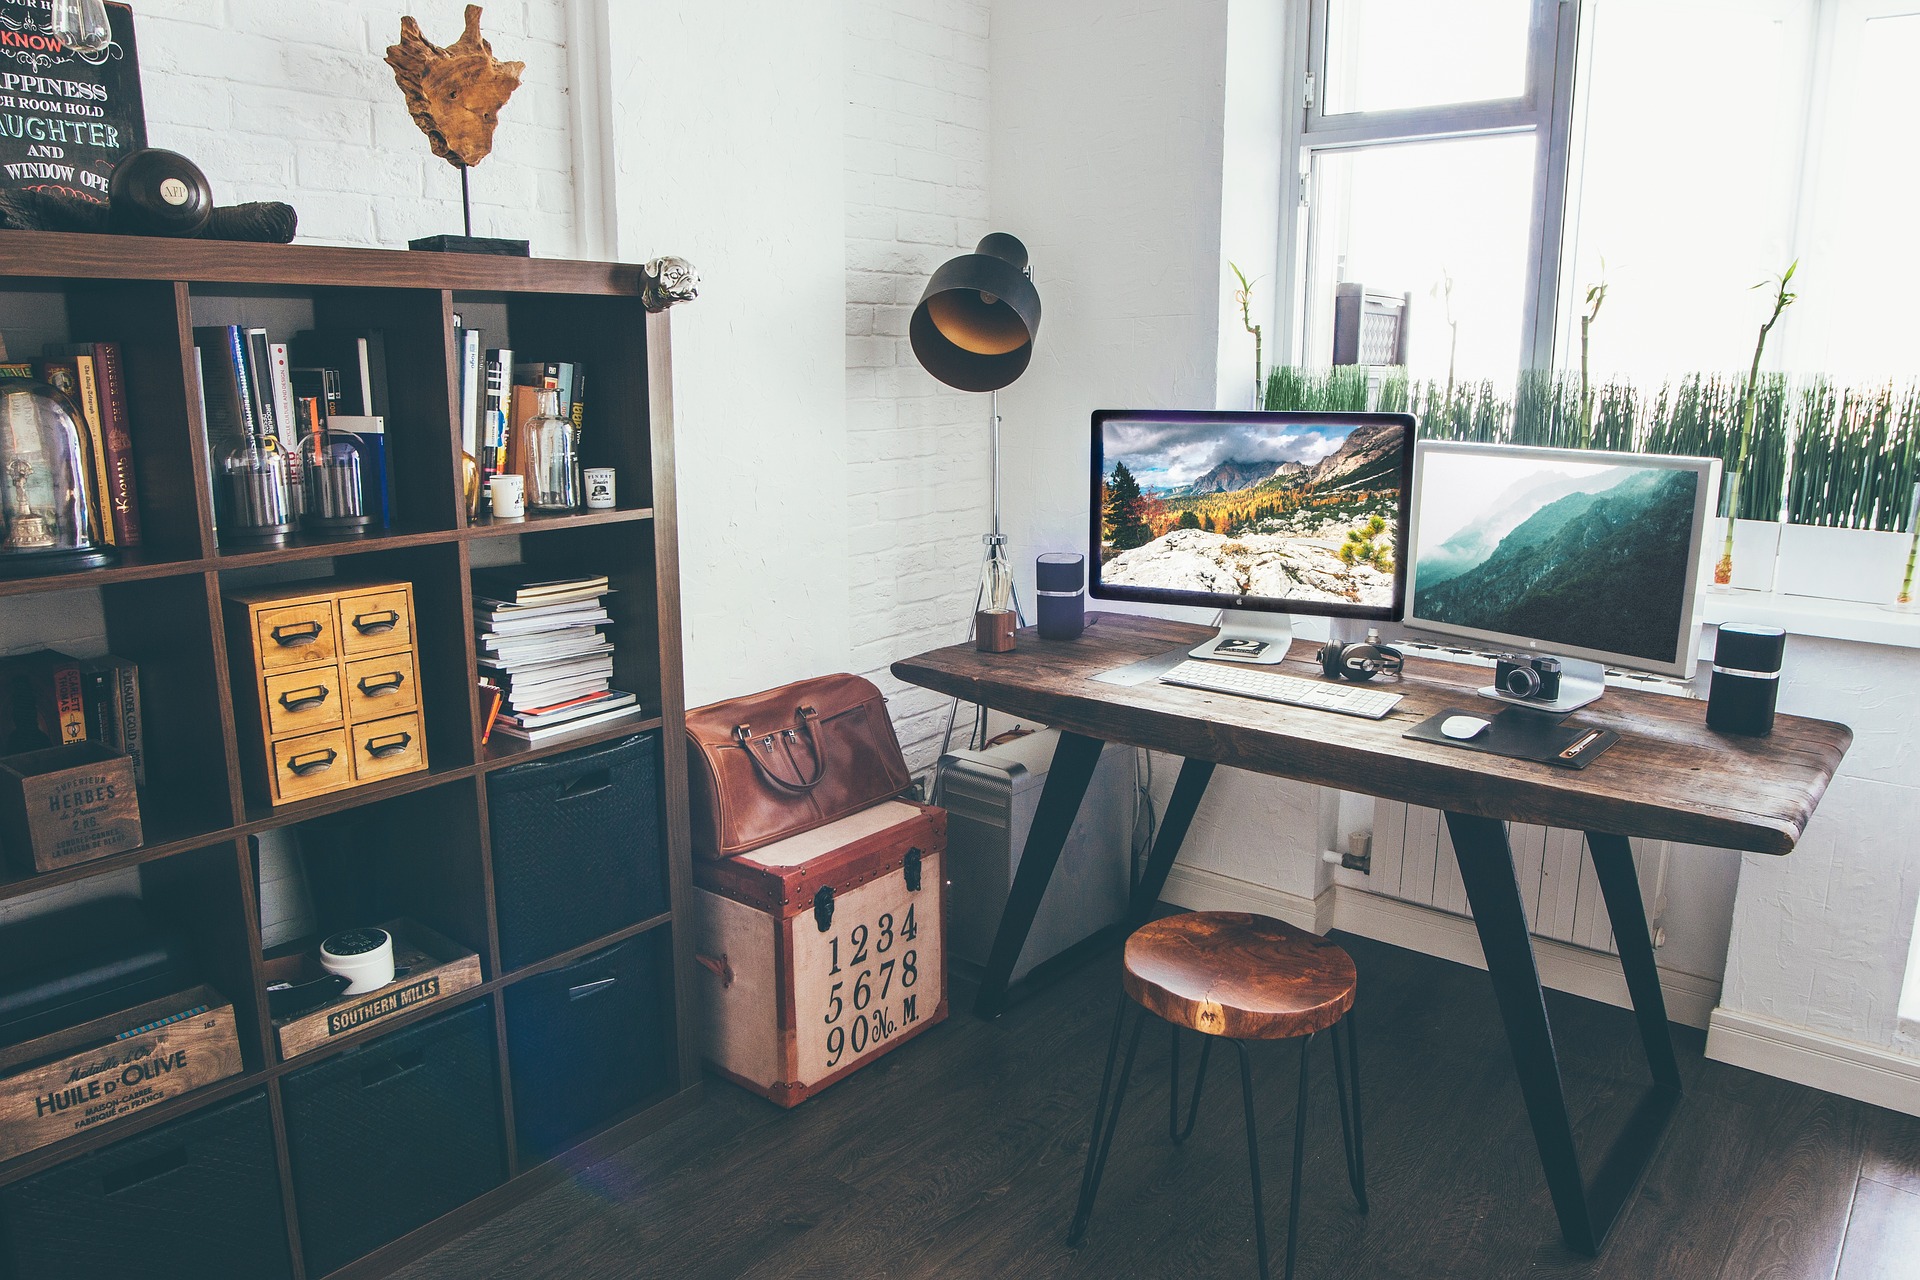 Three Simple Organizing Tips for Your Home & Office